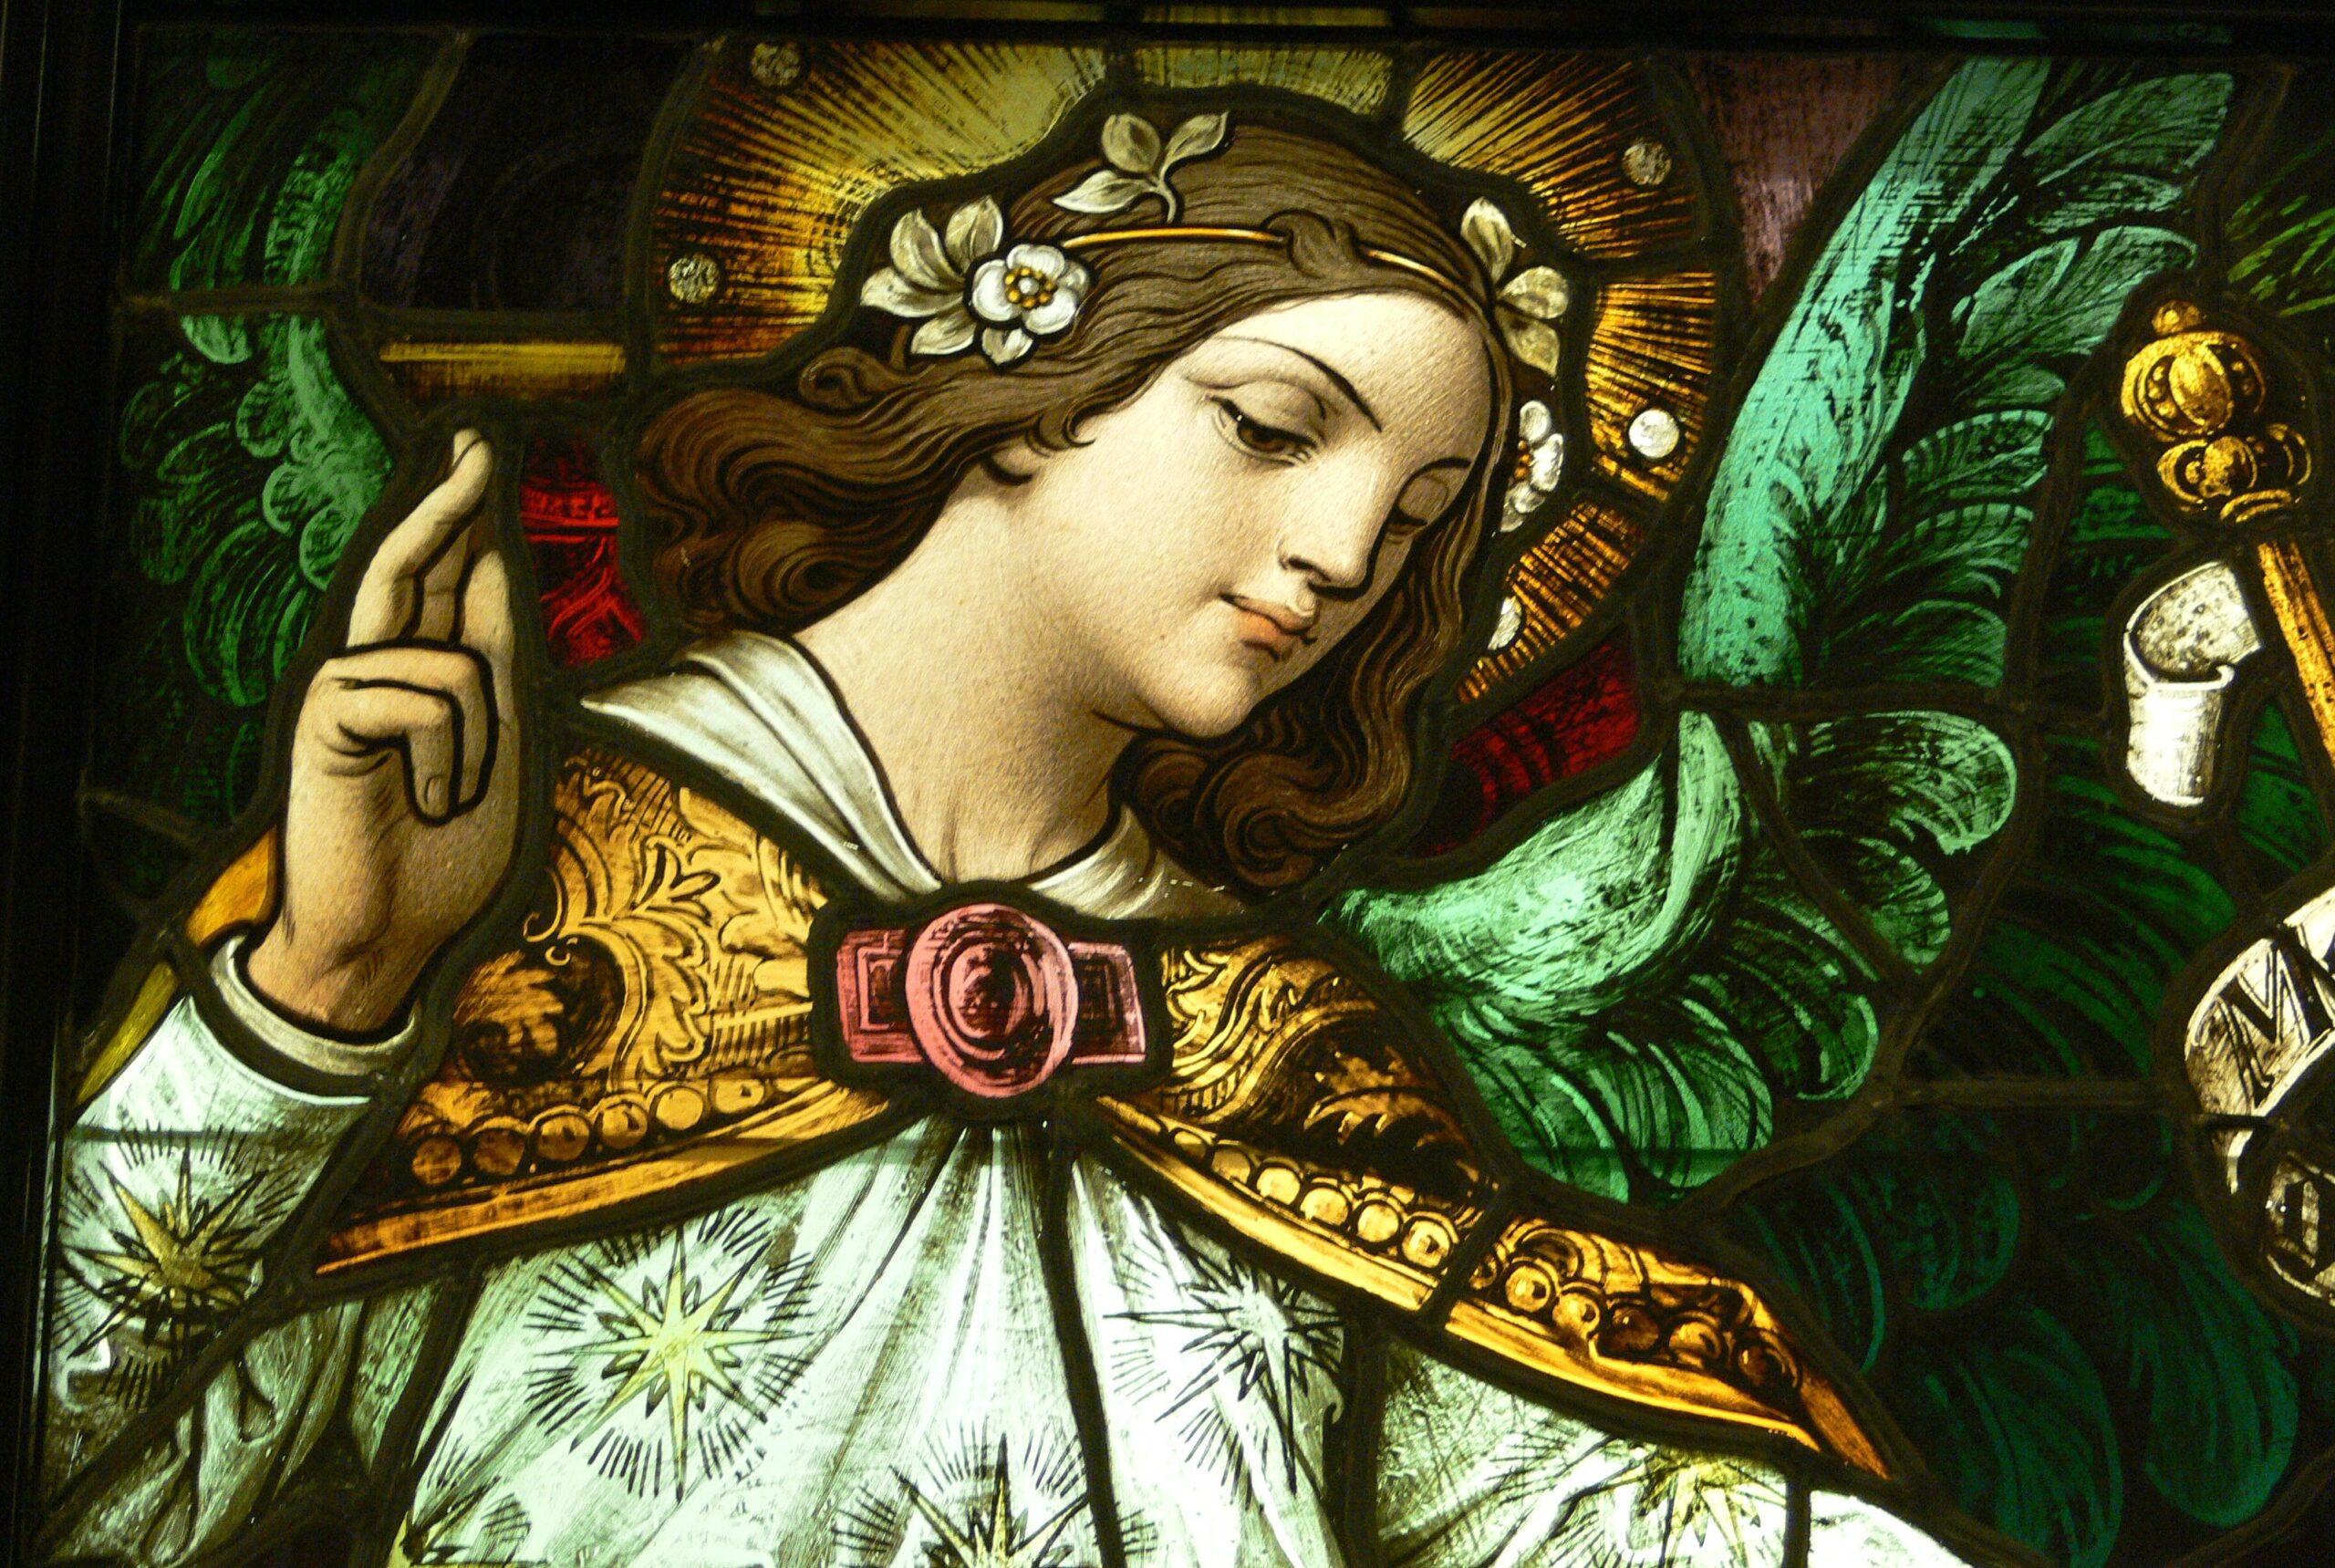 A detail from a stained glass depiction of The Annunciation in the Mausoleum of the Roman Catholic Cathedral of Our Lady of the Angels, Los Angeles, California; originally created in the 1920s for Saint Vibiana Cathedral, Los Angeles. This undated photo is released into the public domain. (OSV news photo/Wikimedia Commons)